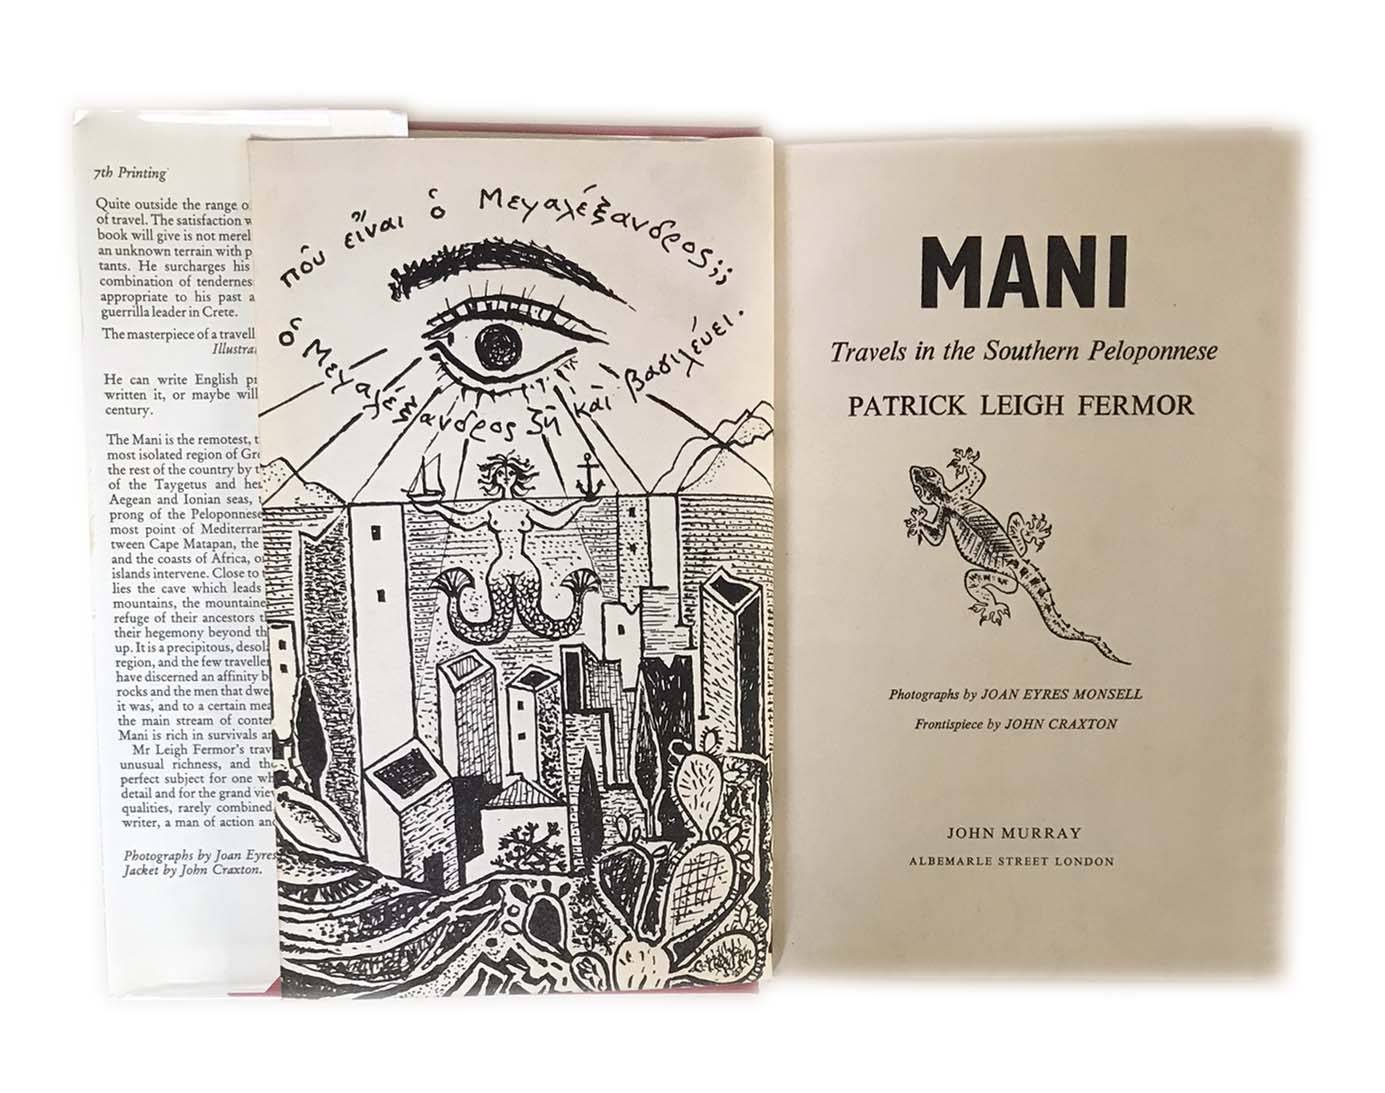 MANI BY PATRICK LEIGH FERMOR